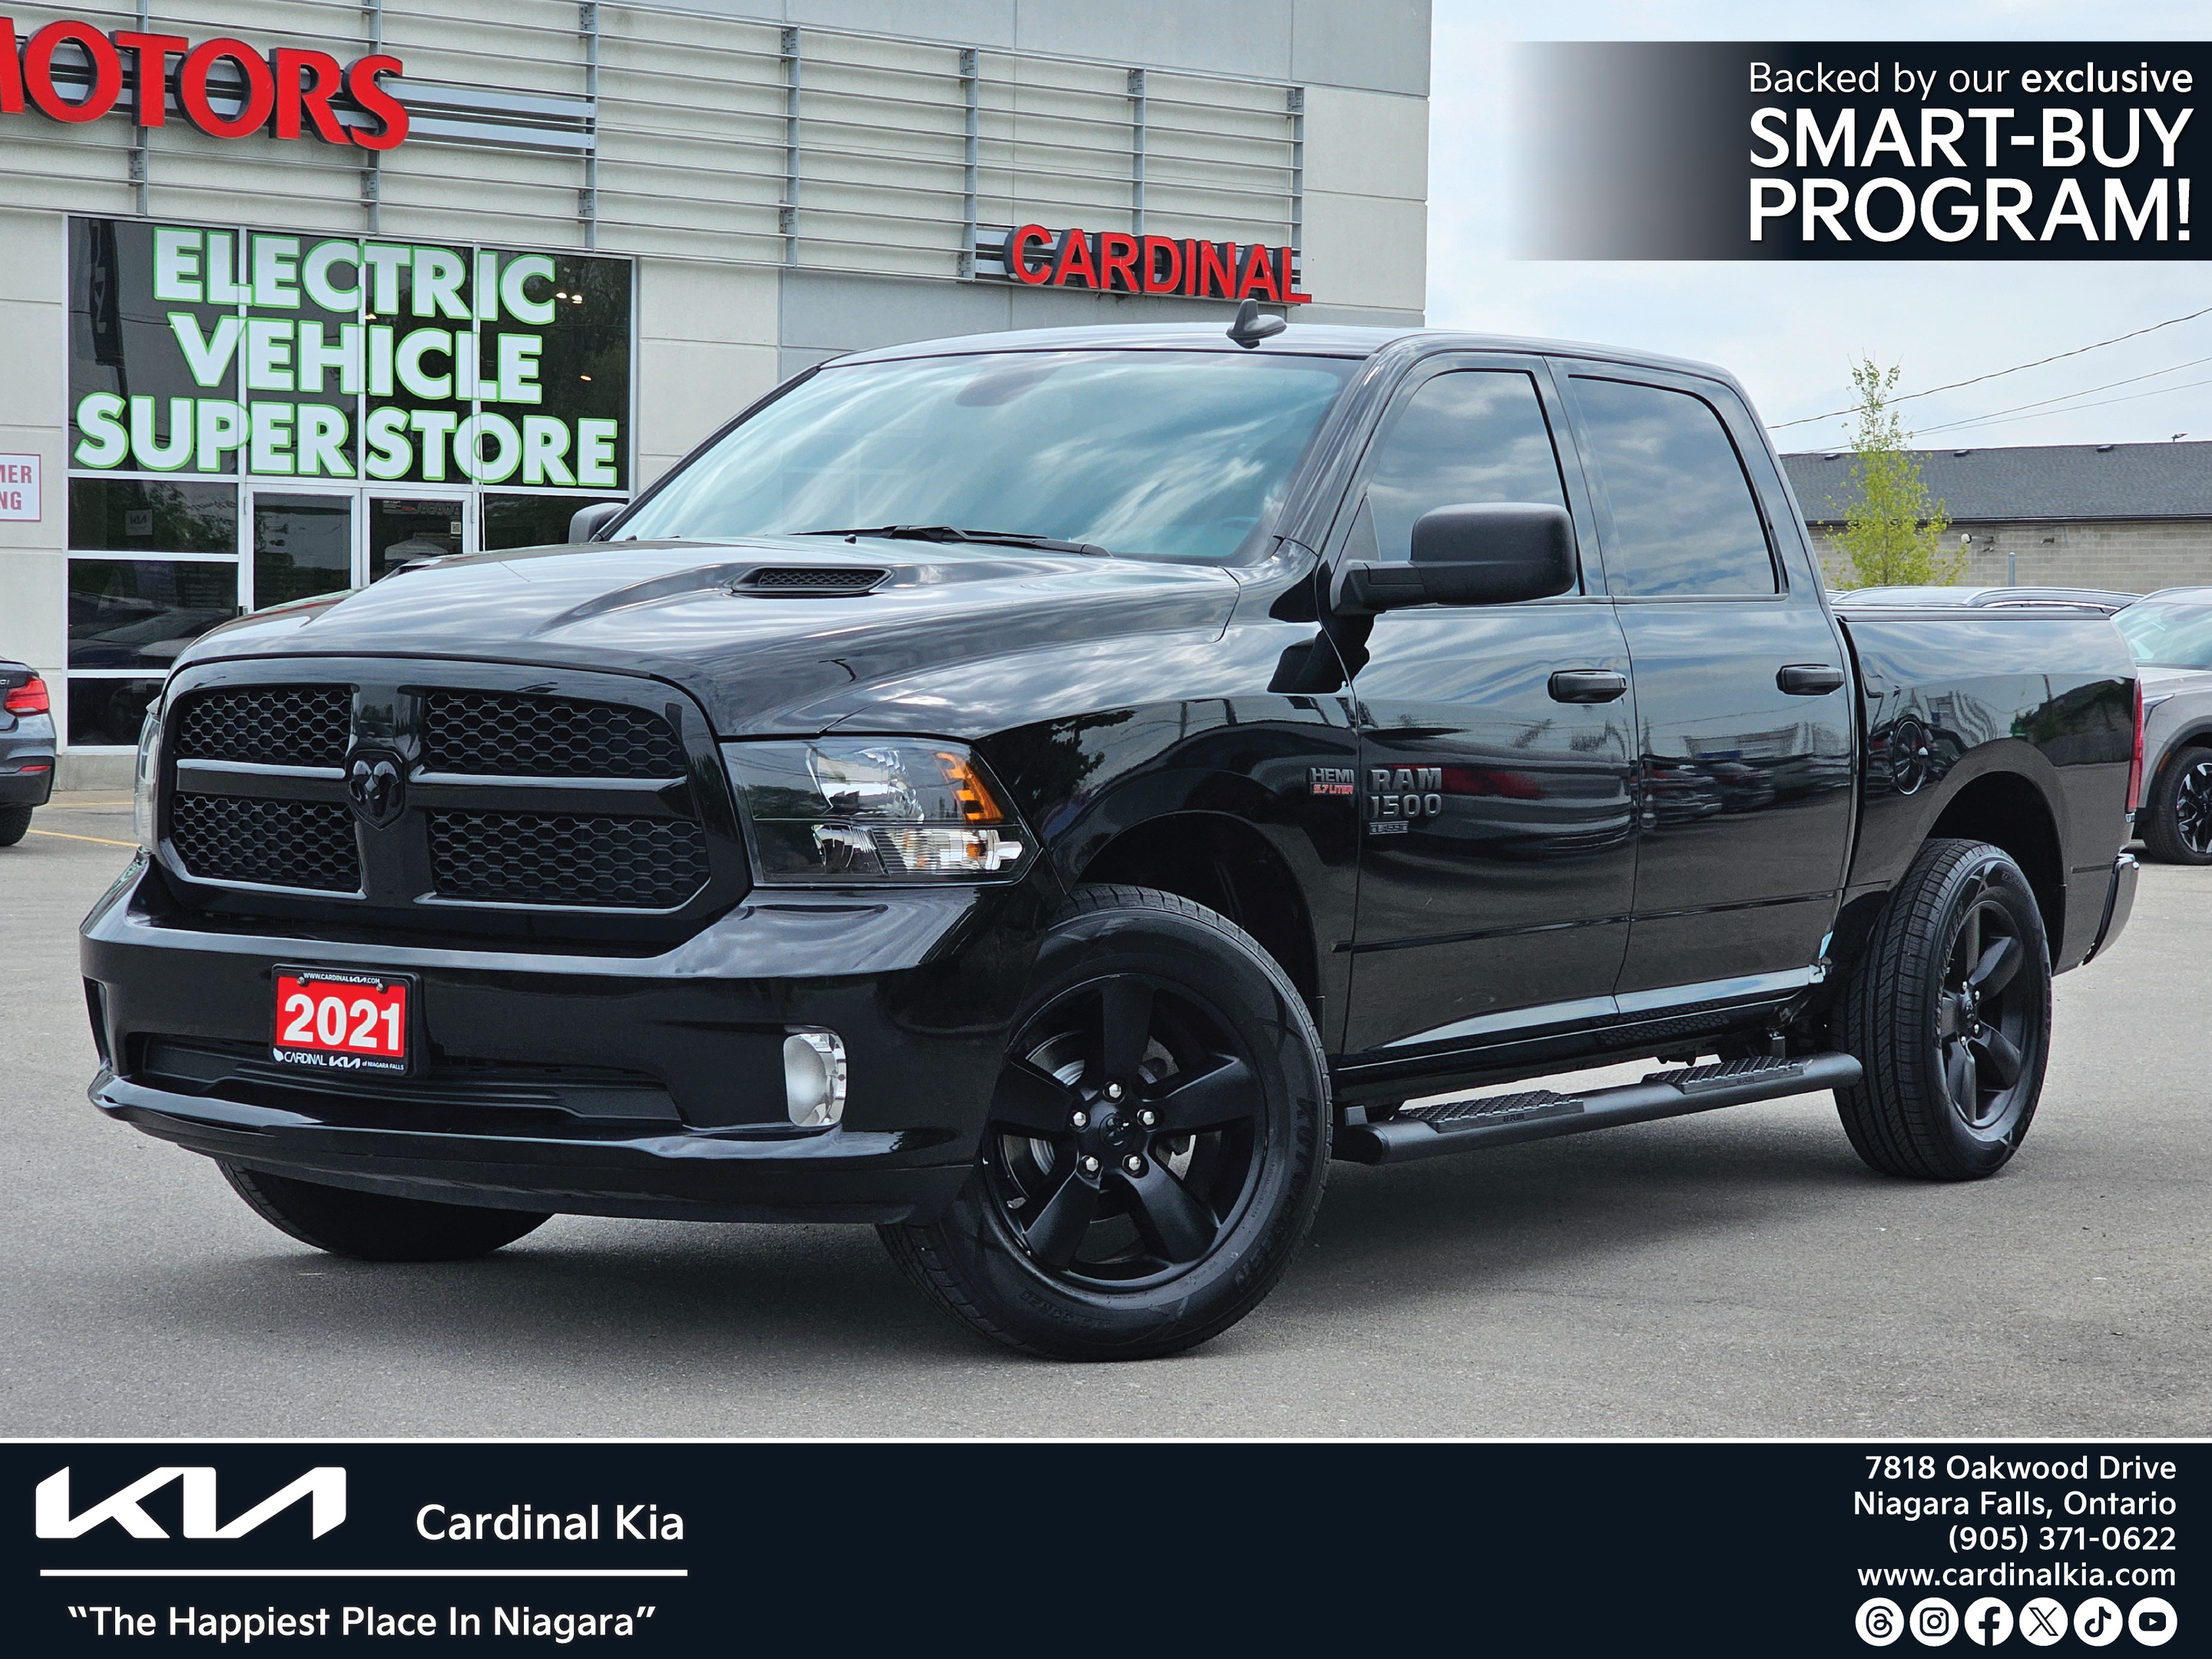 2021 Ram 1500 Classic Express, 4X4, Night Edition, Heated Seats and Stee